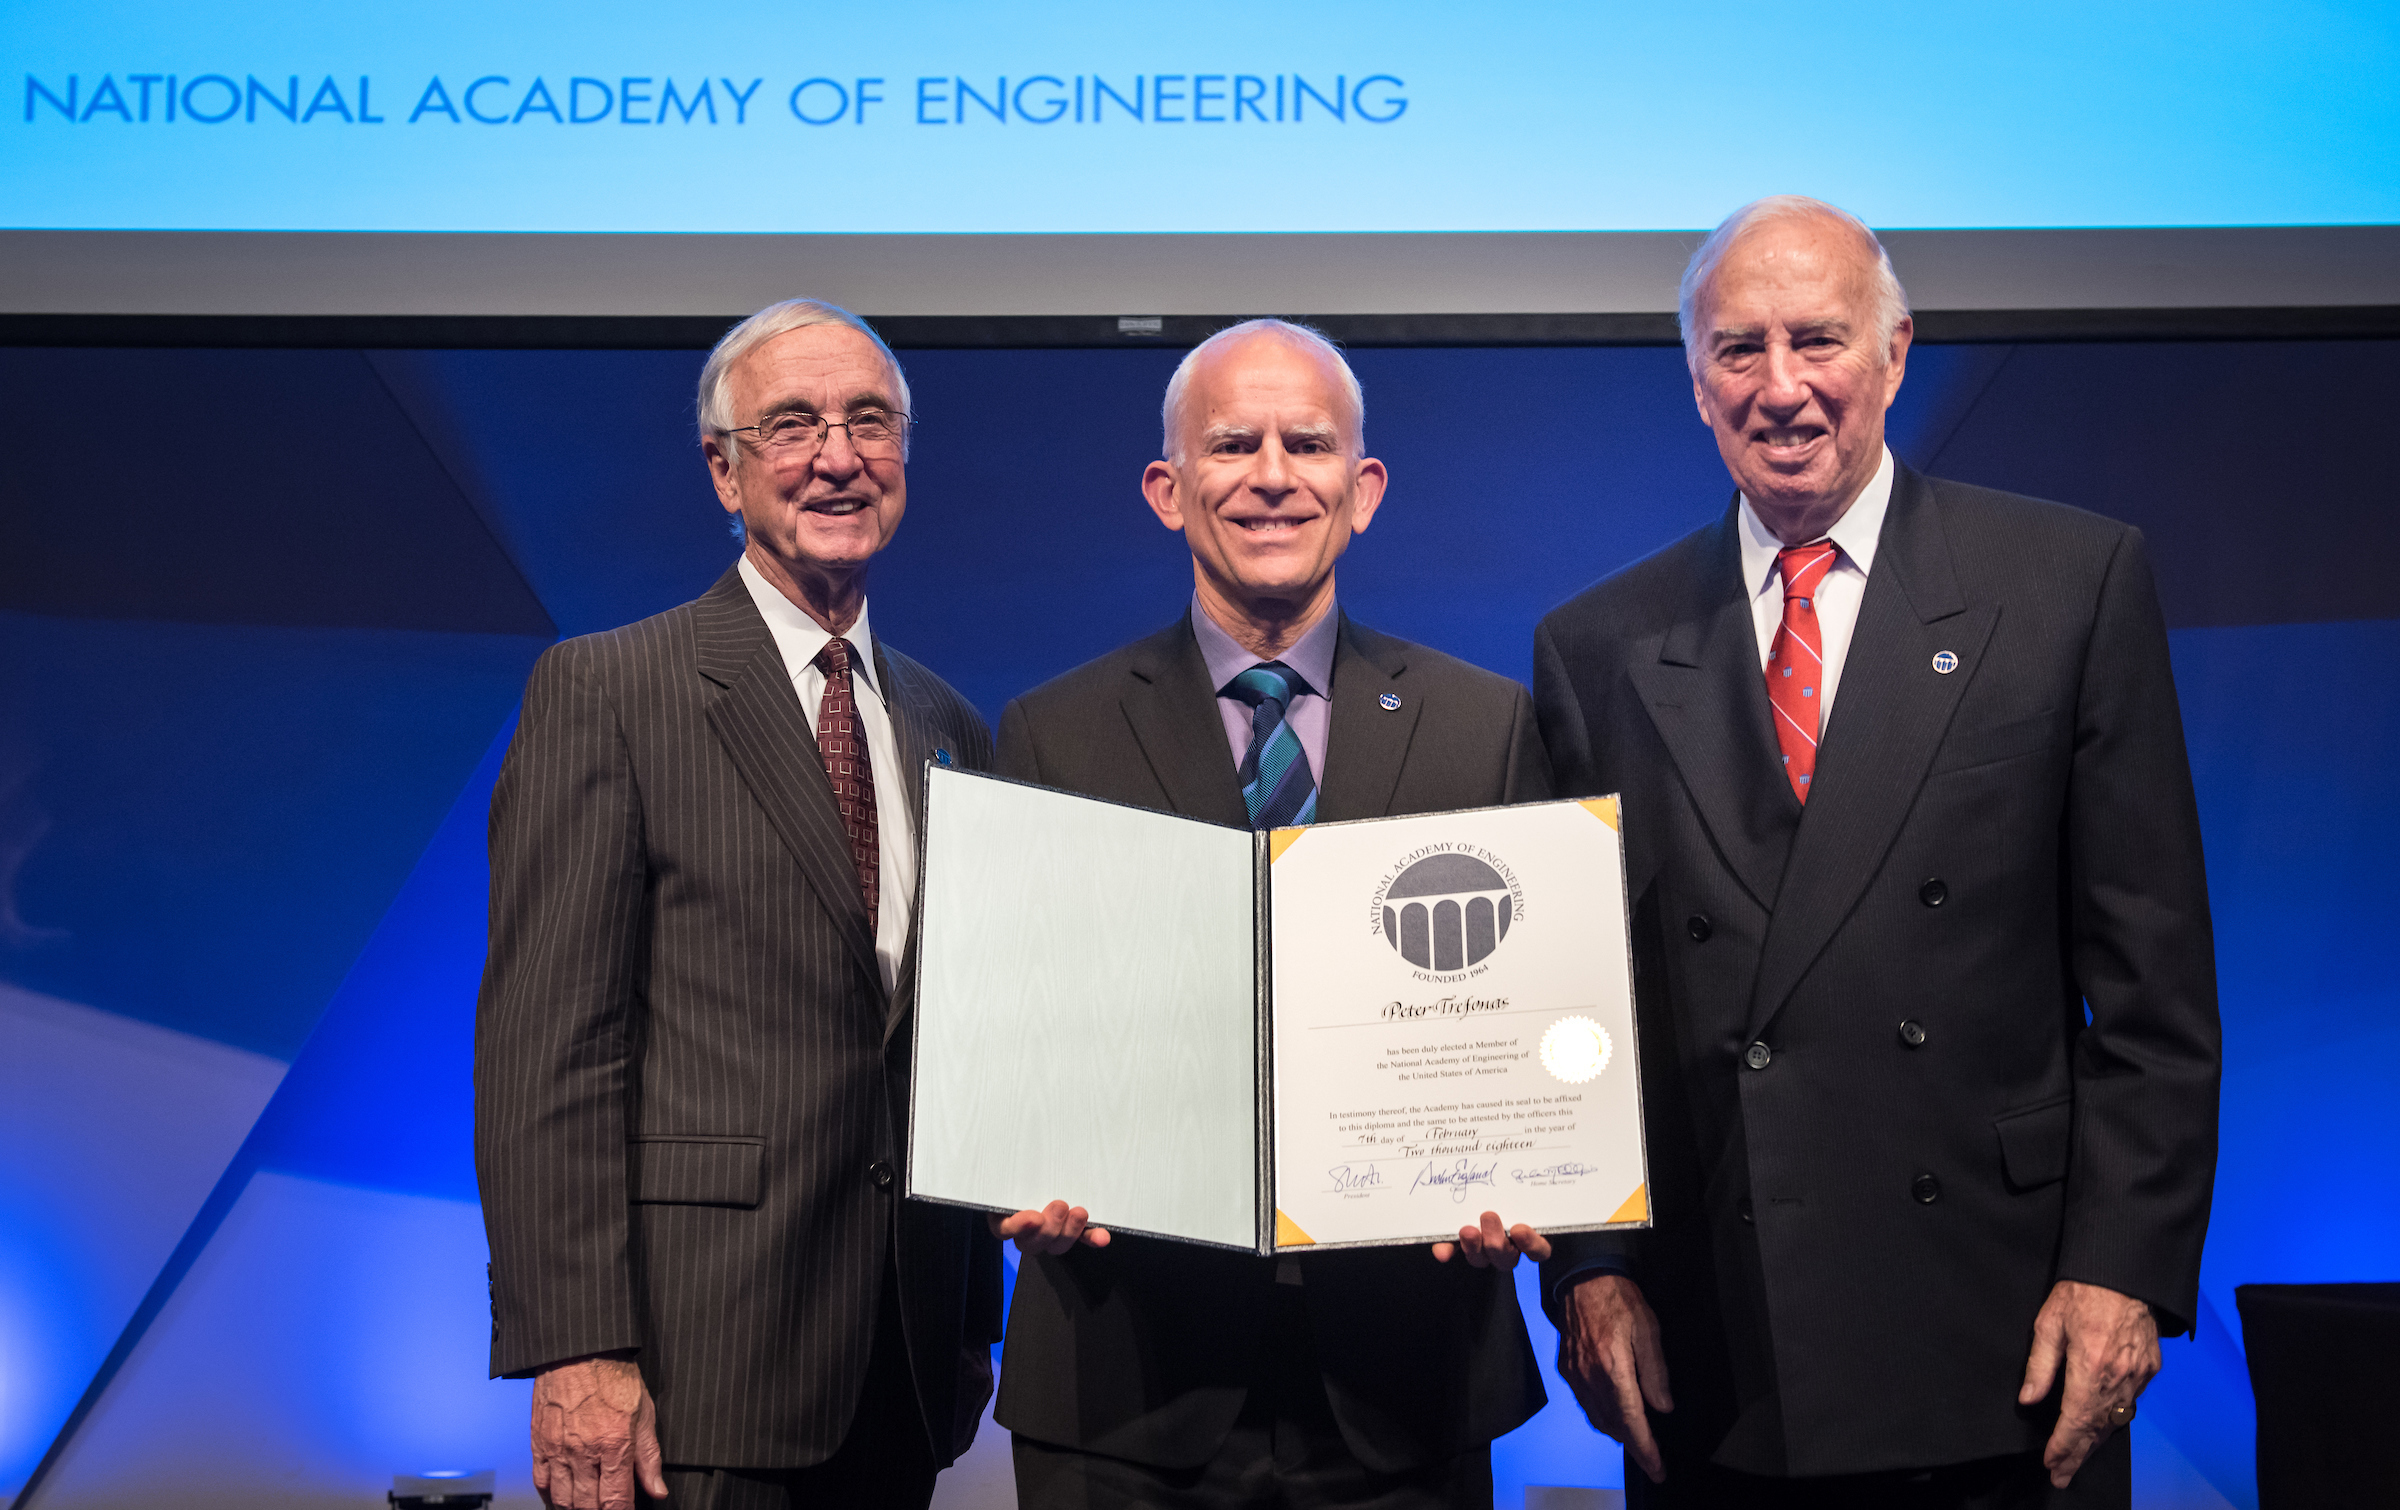 Peter Trefonas, Ph.D. was inducted into the National Academy of Engineering (NAE)